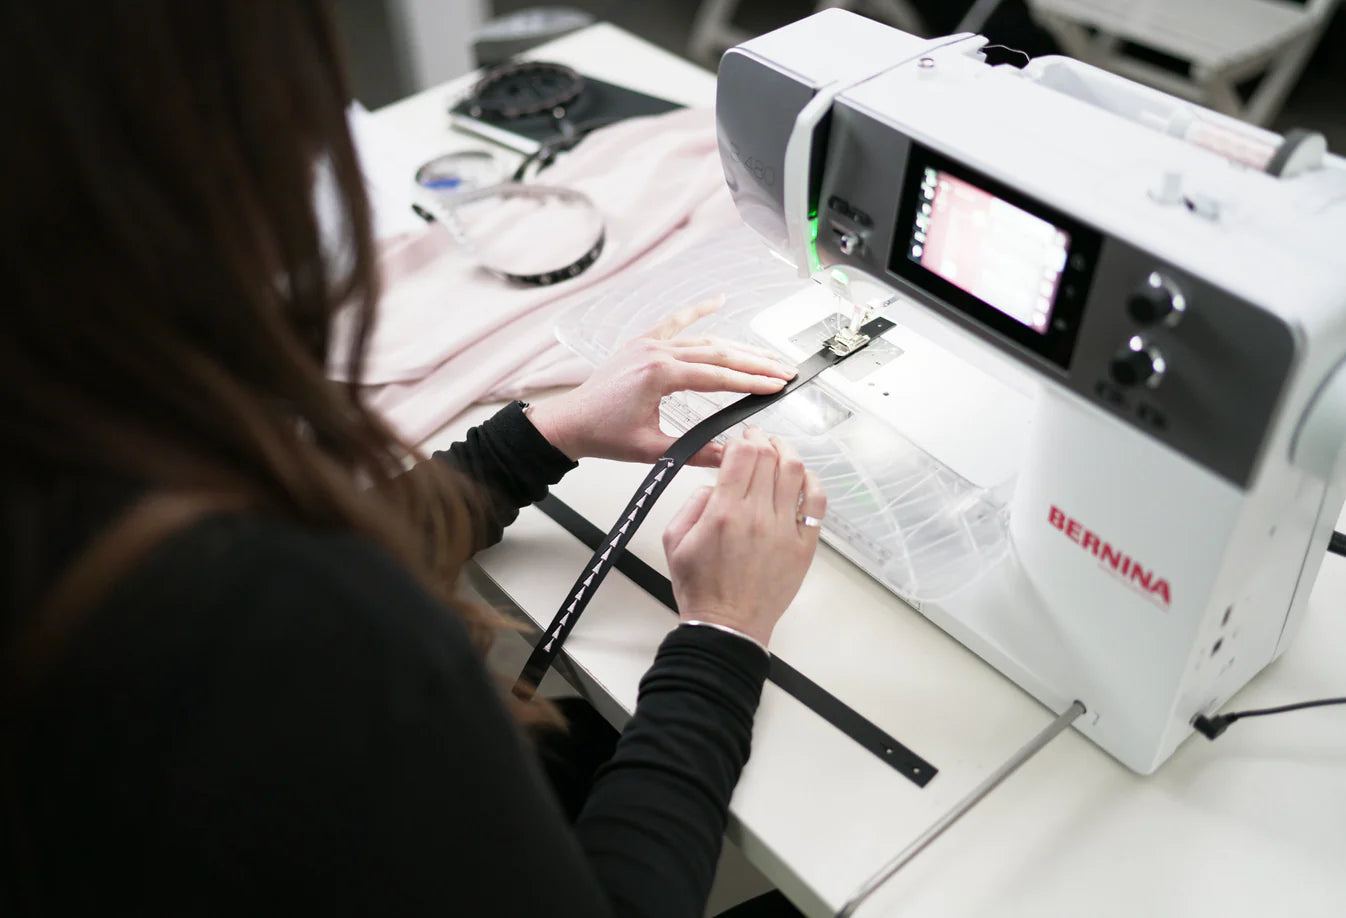 BERNINA 480- Visit us or call for pricing